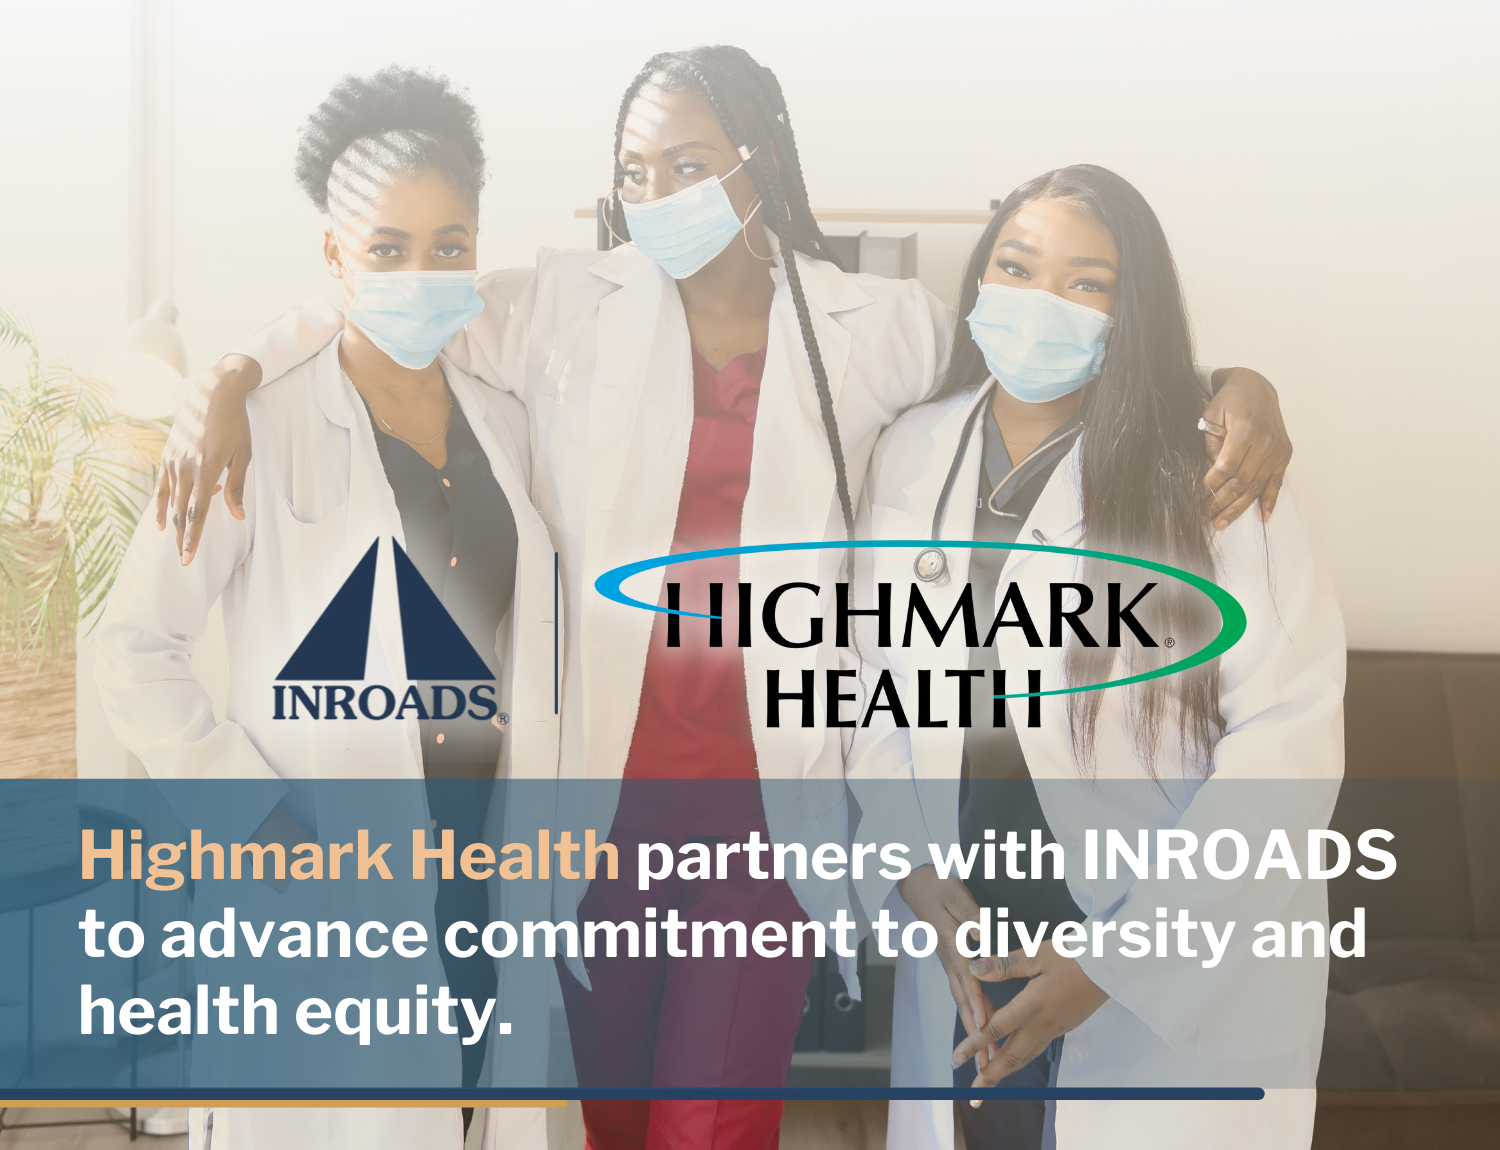 Featured image for “HIGHMARK HEALTH PARTNERS WITH INROADS TO ADVANCE COMMITMENT TO DIVERSITY AND HEALTH EQUITY”